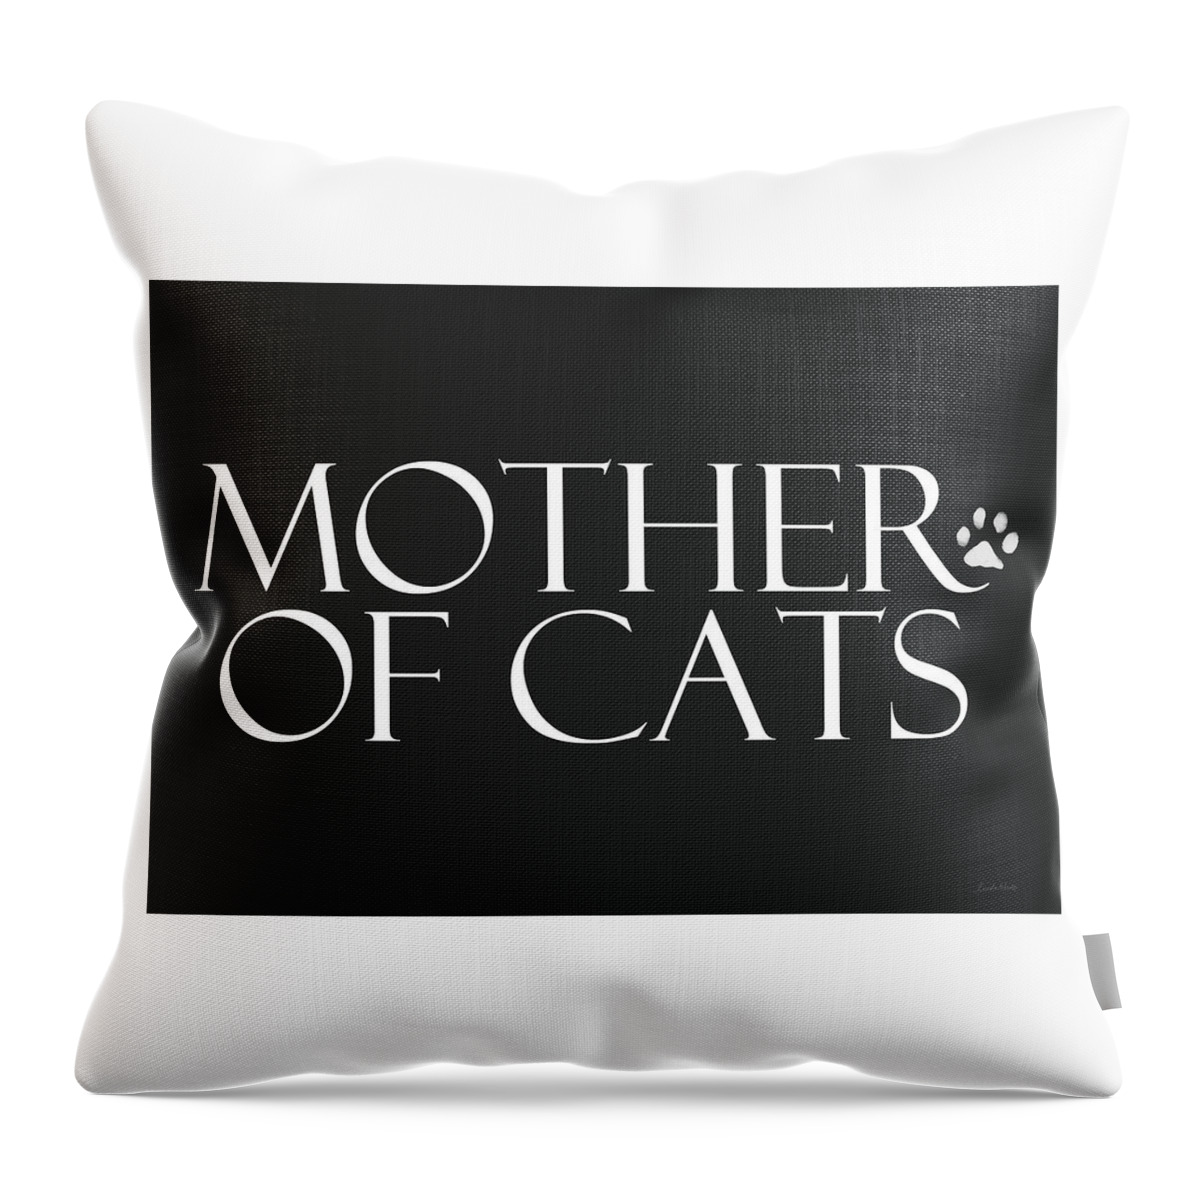 Cat Throw Pillow featuring the digital art Mother of Cats- by Linda Woods by Linda Woods